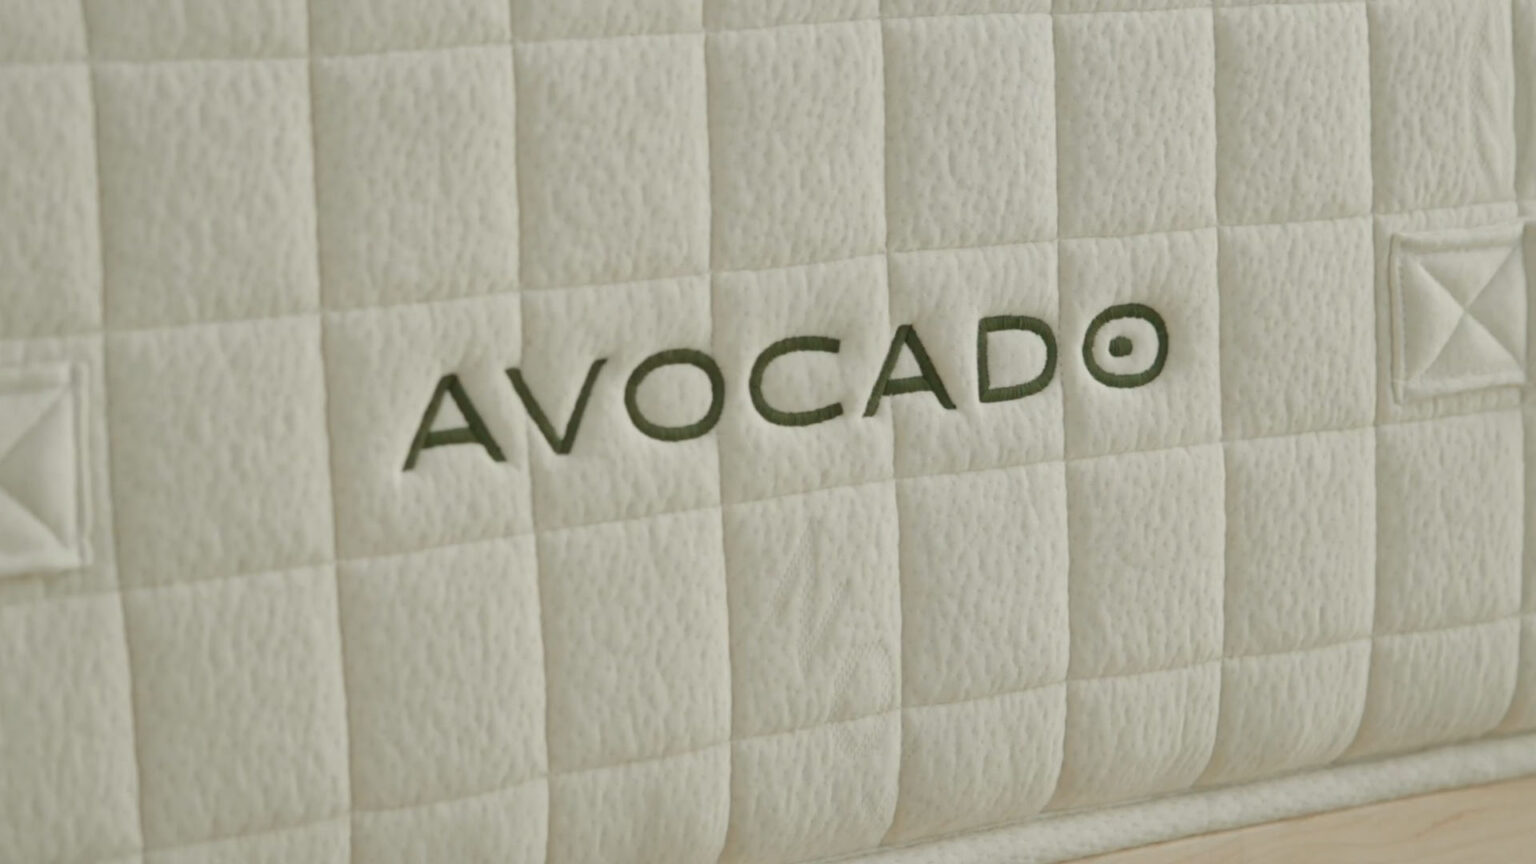 Avocado Mattress delivers to Downers Grove